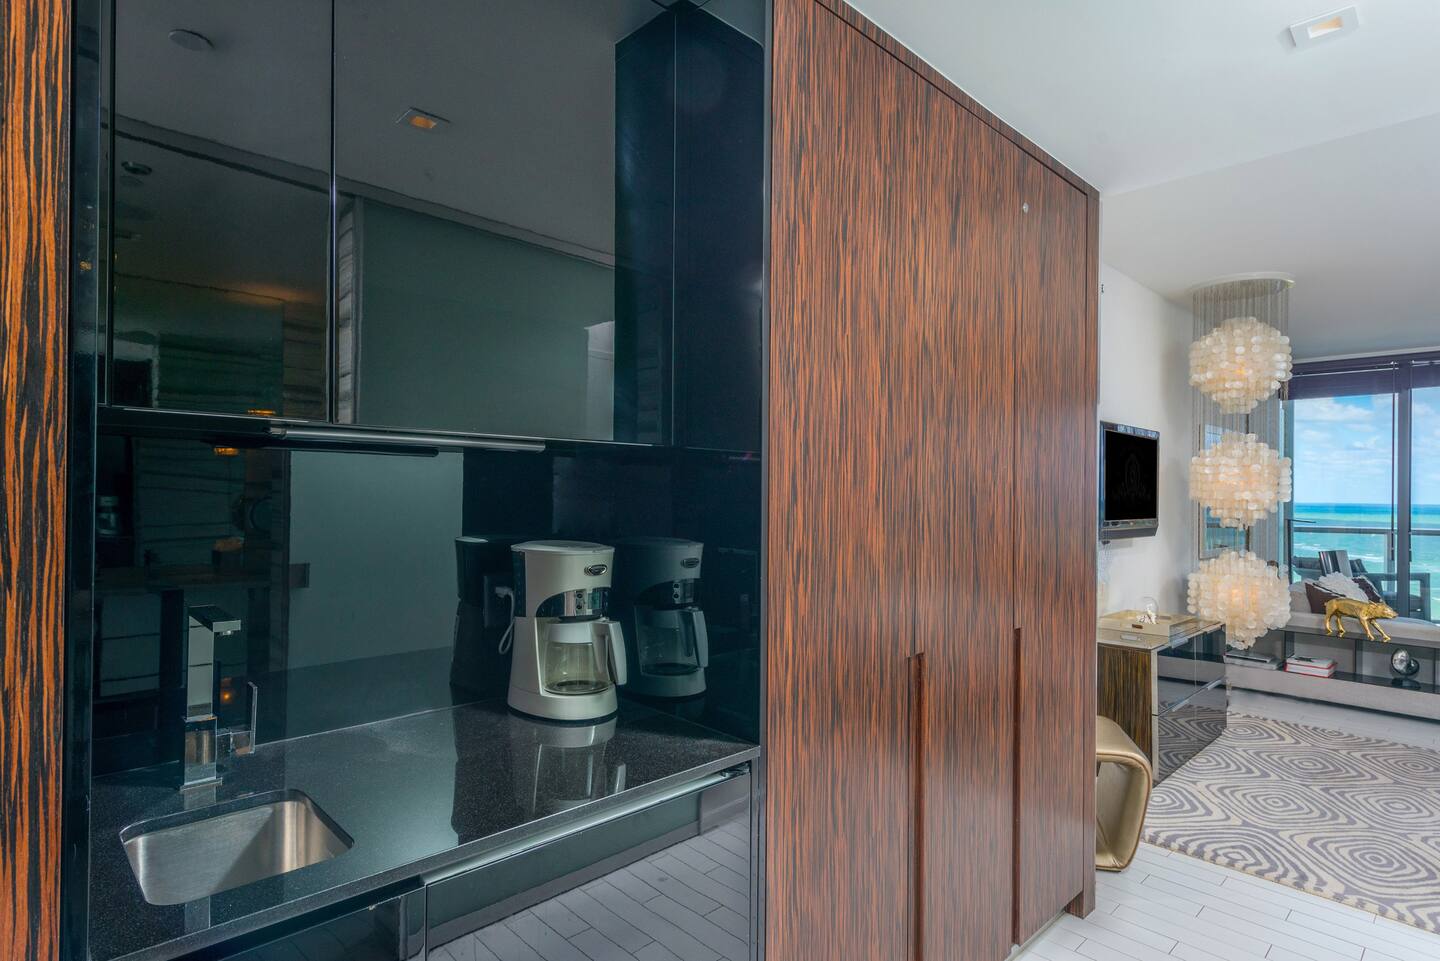 An efficiently designed kitchenette featuring sleek countertops.